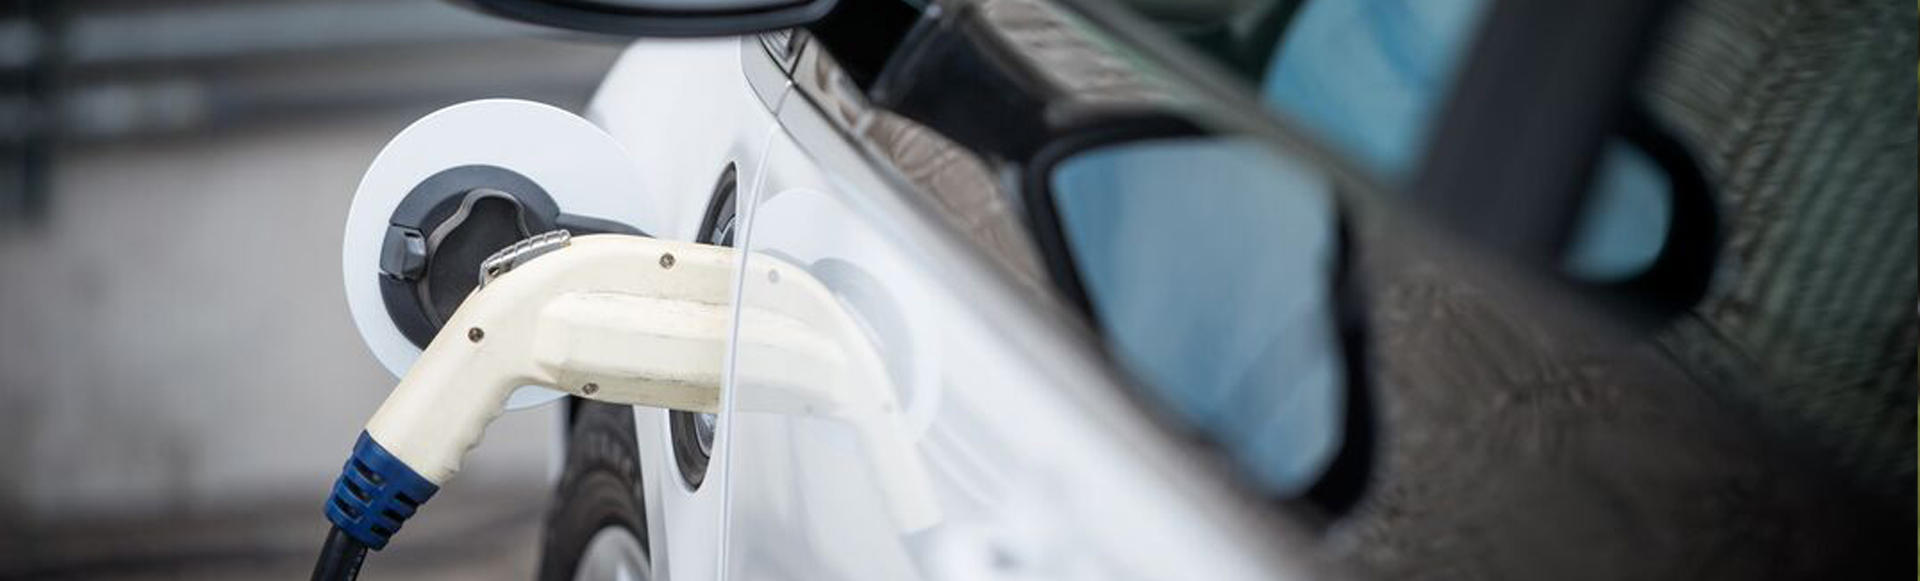 HomeServe and CenterPoint Energy Launch New Coverage for Electric Vehicle Home Charging Protection Plan